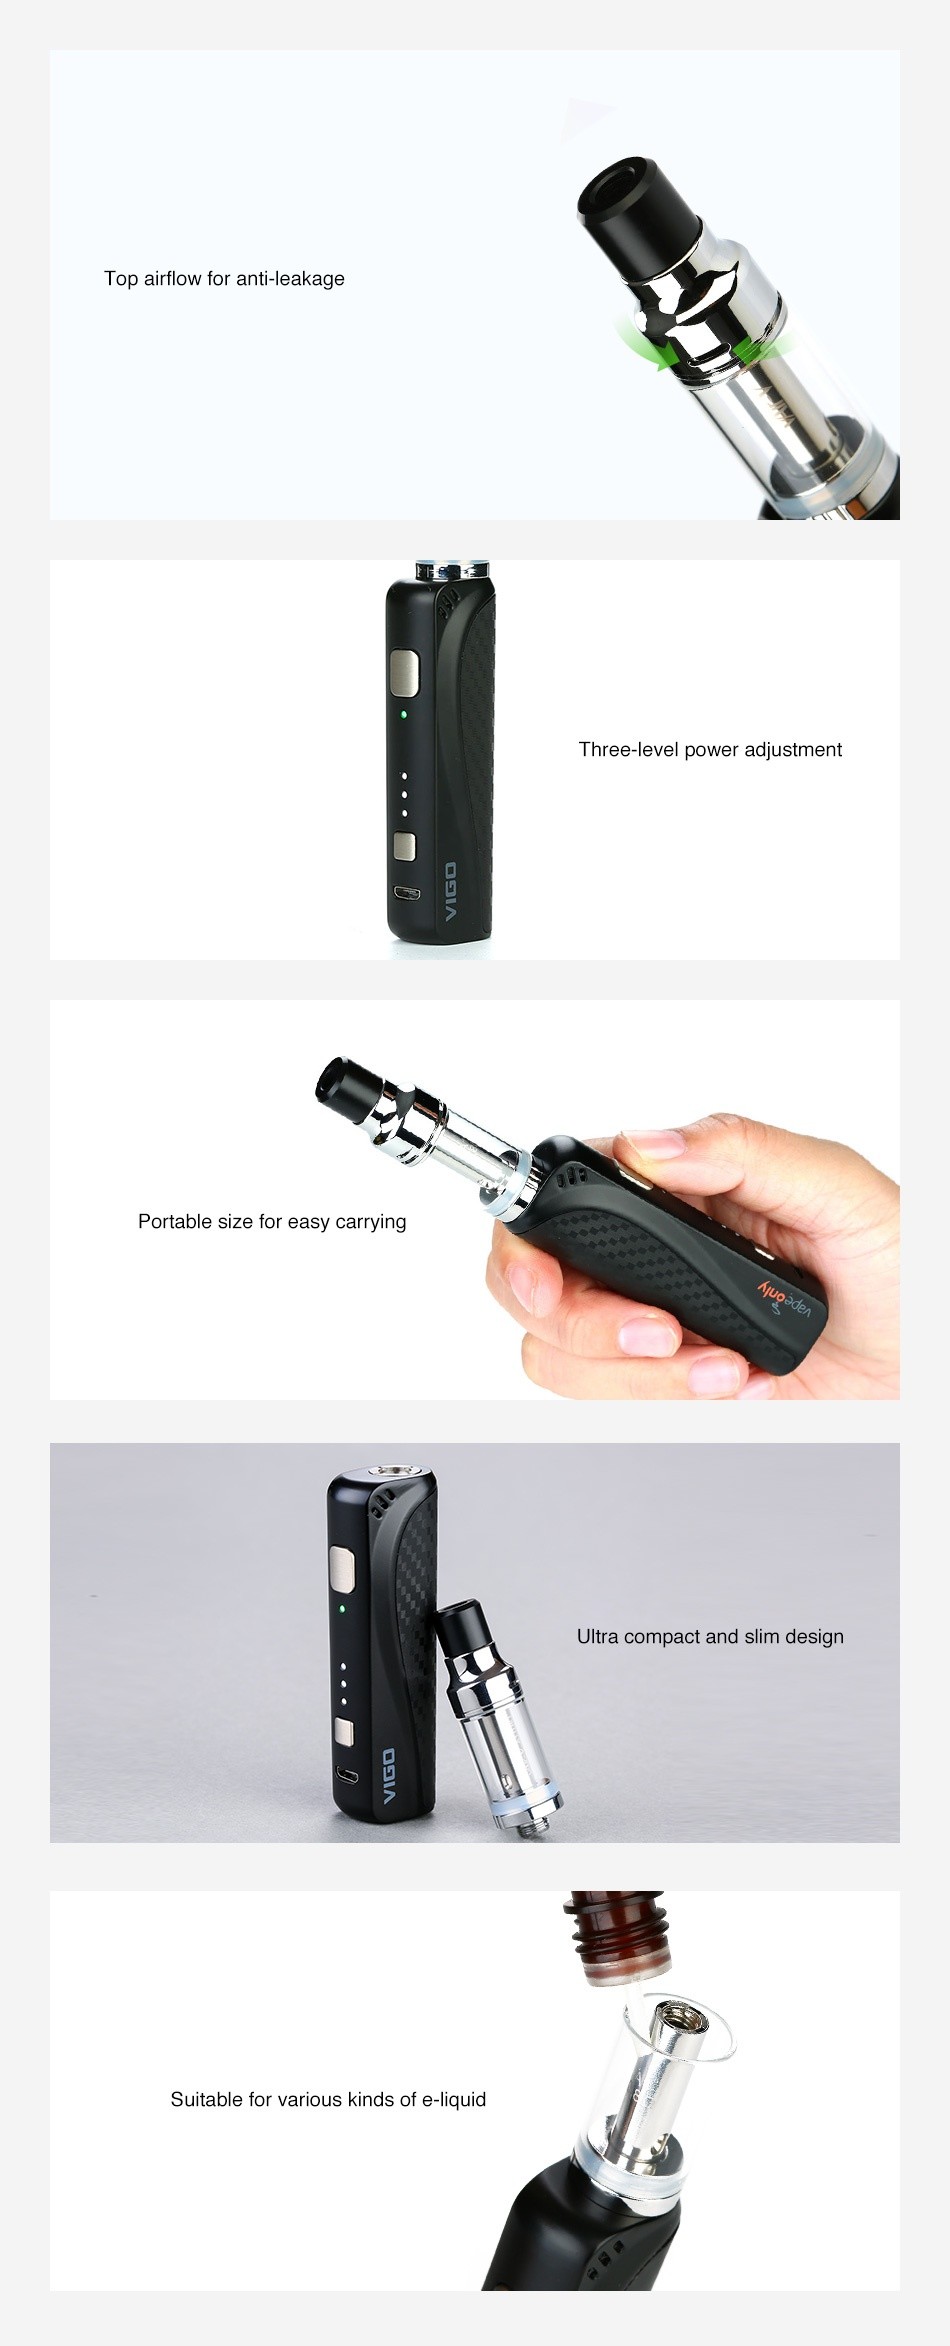 VapeOnly Vigo Starter Kit 900mAh Top air flow for anti leakage Three level power adjustmant Portable size for easy carrying Ultra compact and slim design Suitable for various kinds of e liquid